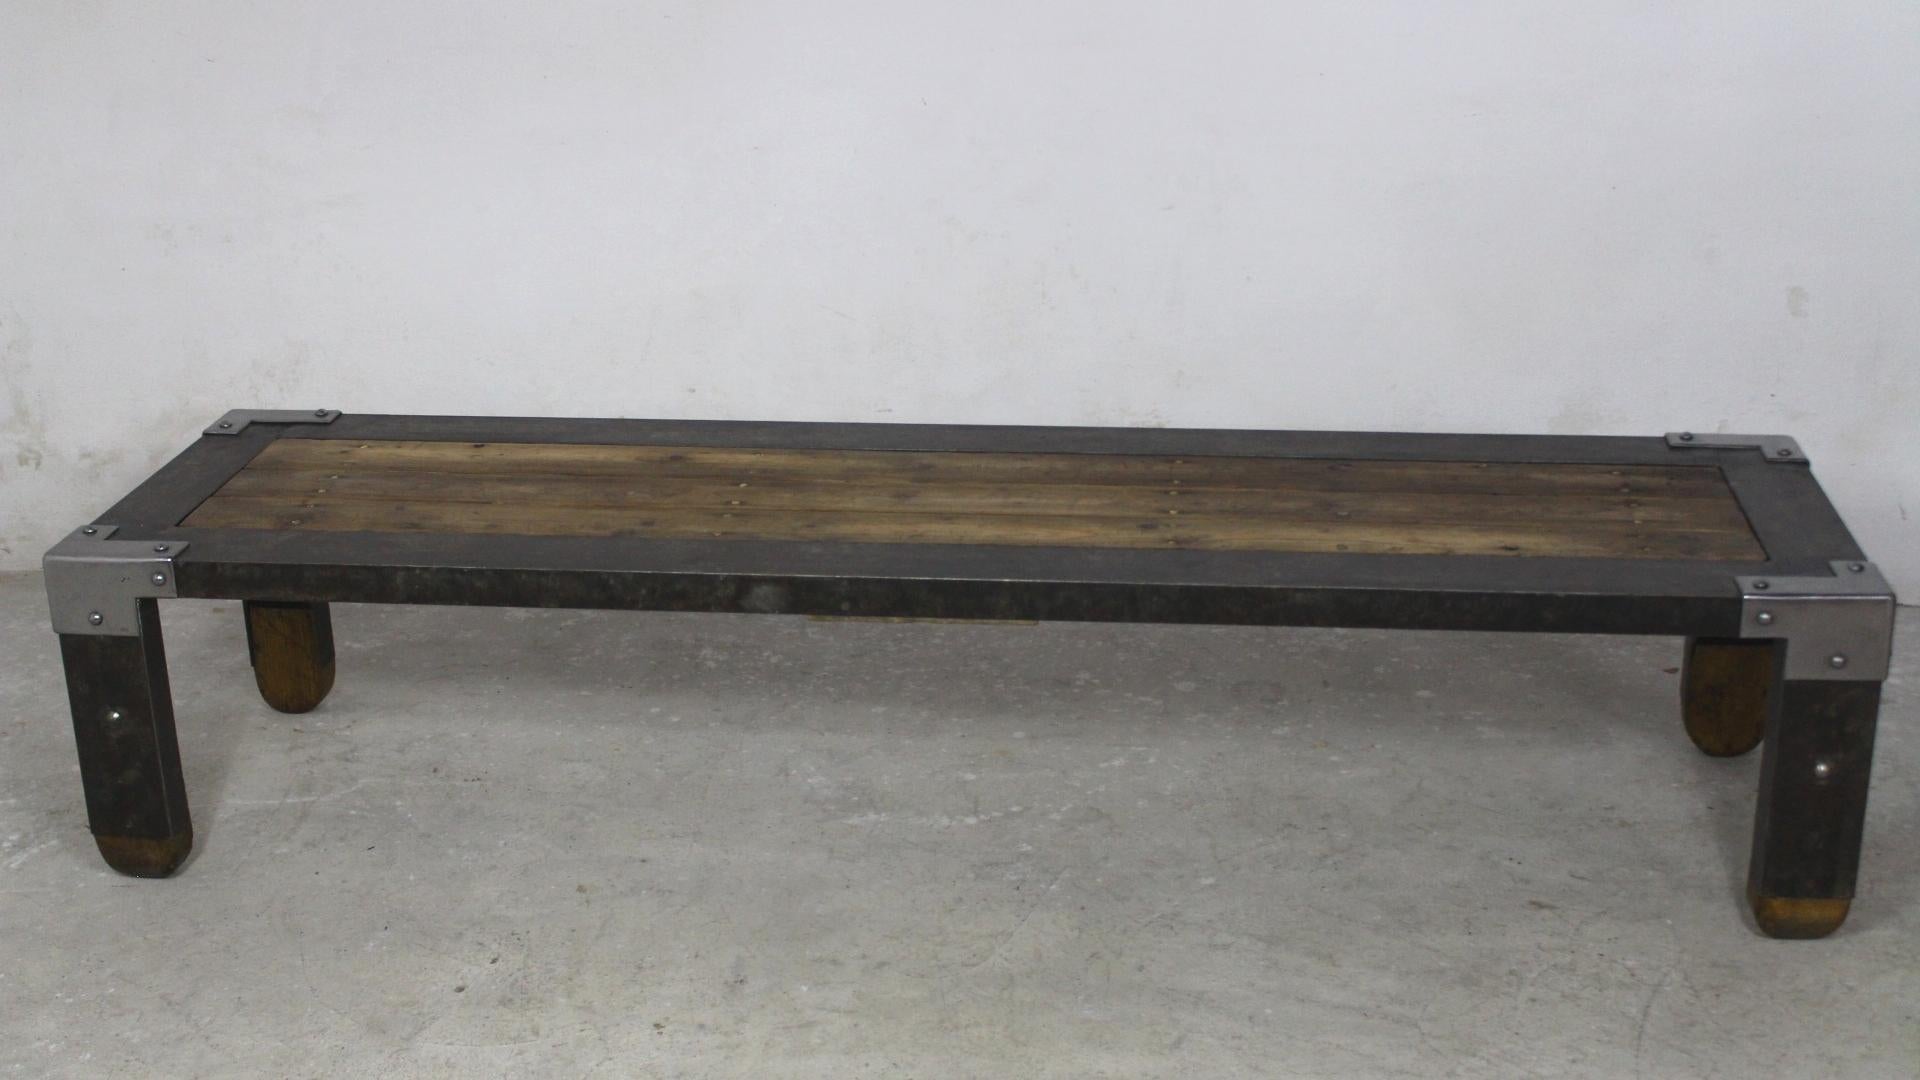 European Long Industrial Coffee Table Made from Riveted Iron and Wood, 1950s For Sale